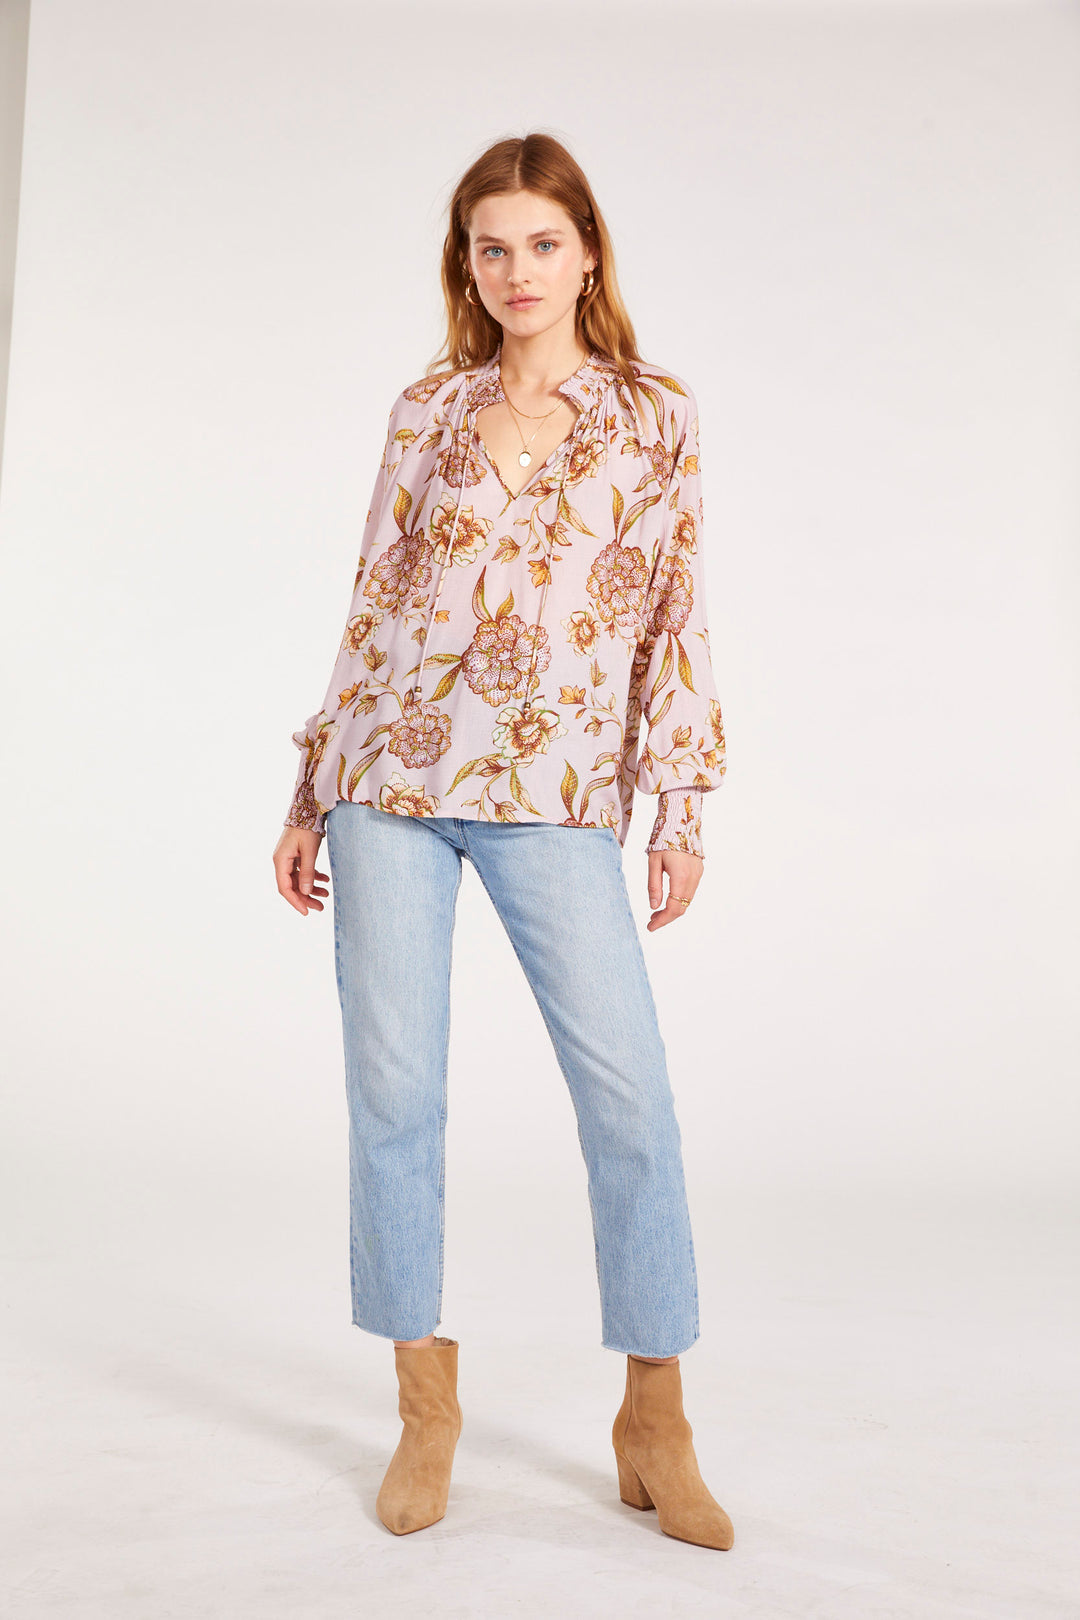 GO WITH THE FLOW-RAL TOP - Kingfisher Road - Online Boutique